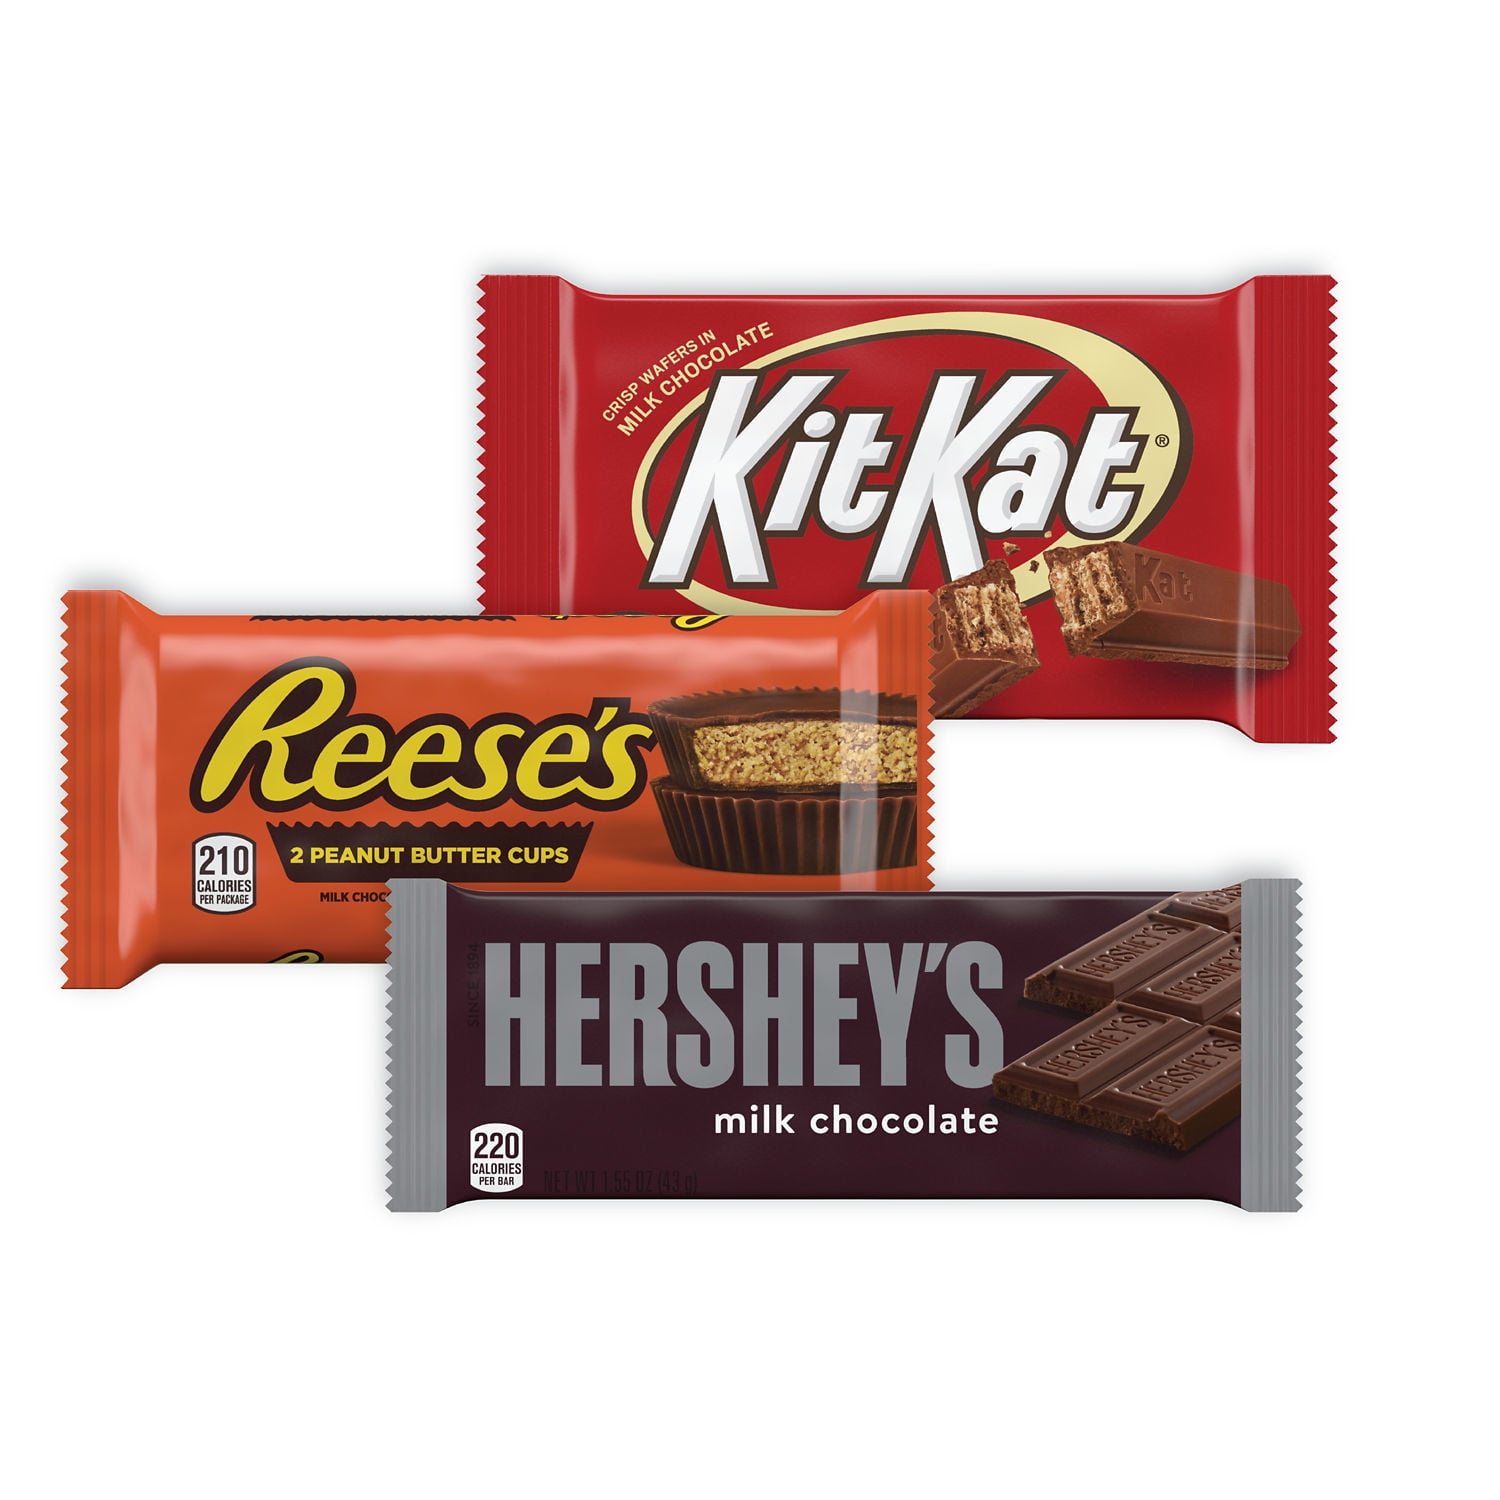 Full Size Chocolate Candy Bar Variety Pack, Assorted 1.5 oz Bar, 18 Bars/Carton,  Ships in 1-3 Business Days - TonerQuest